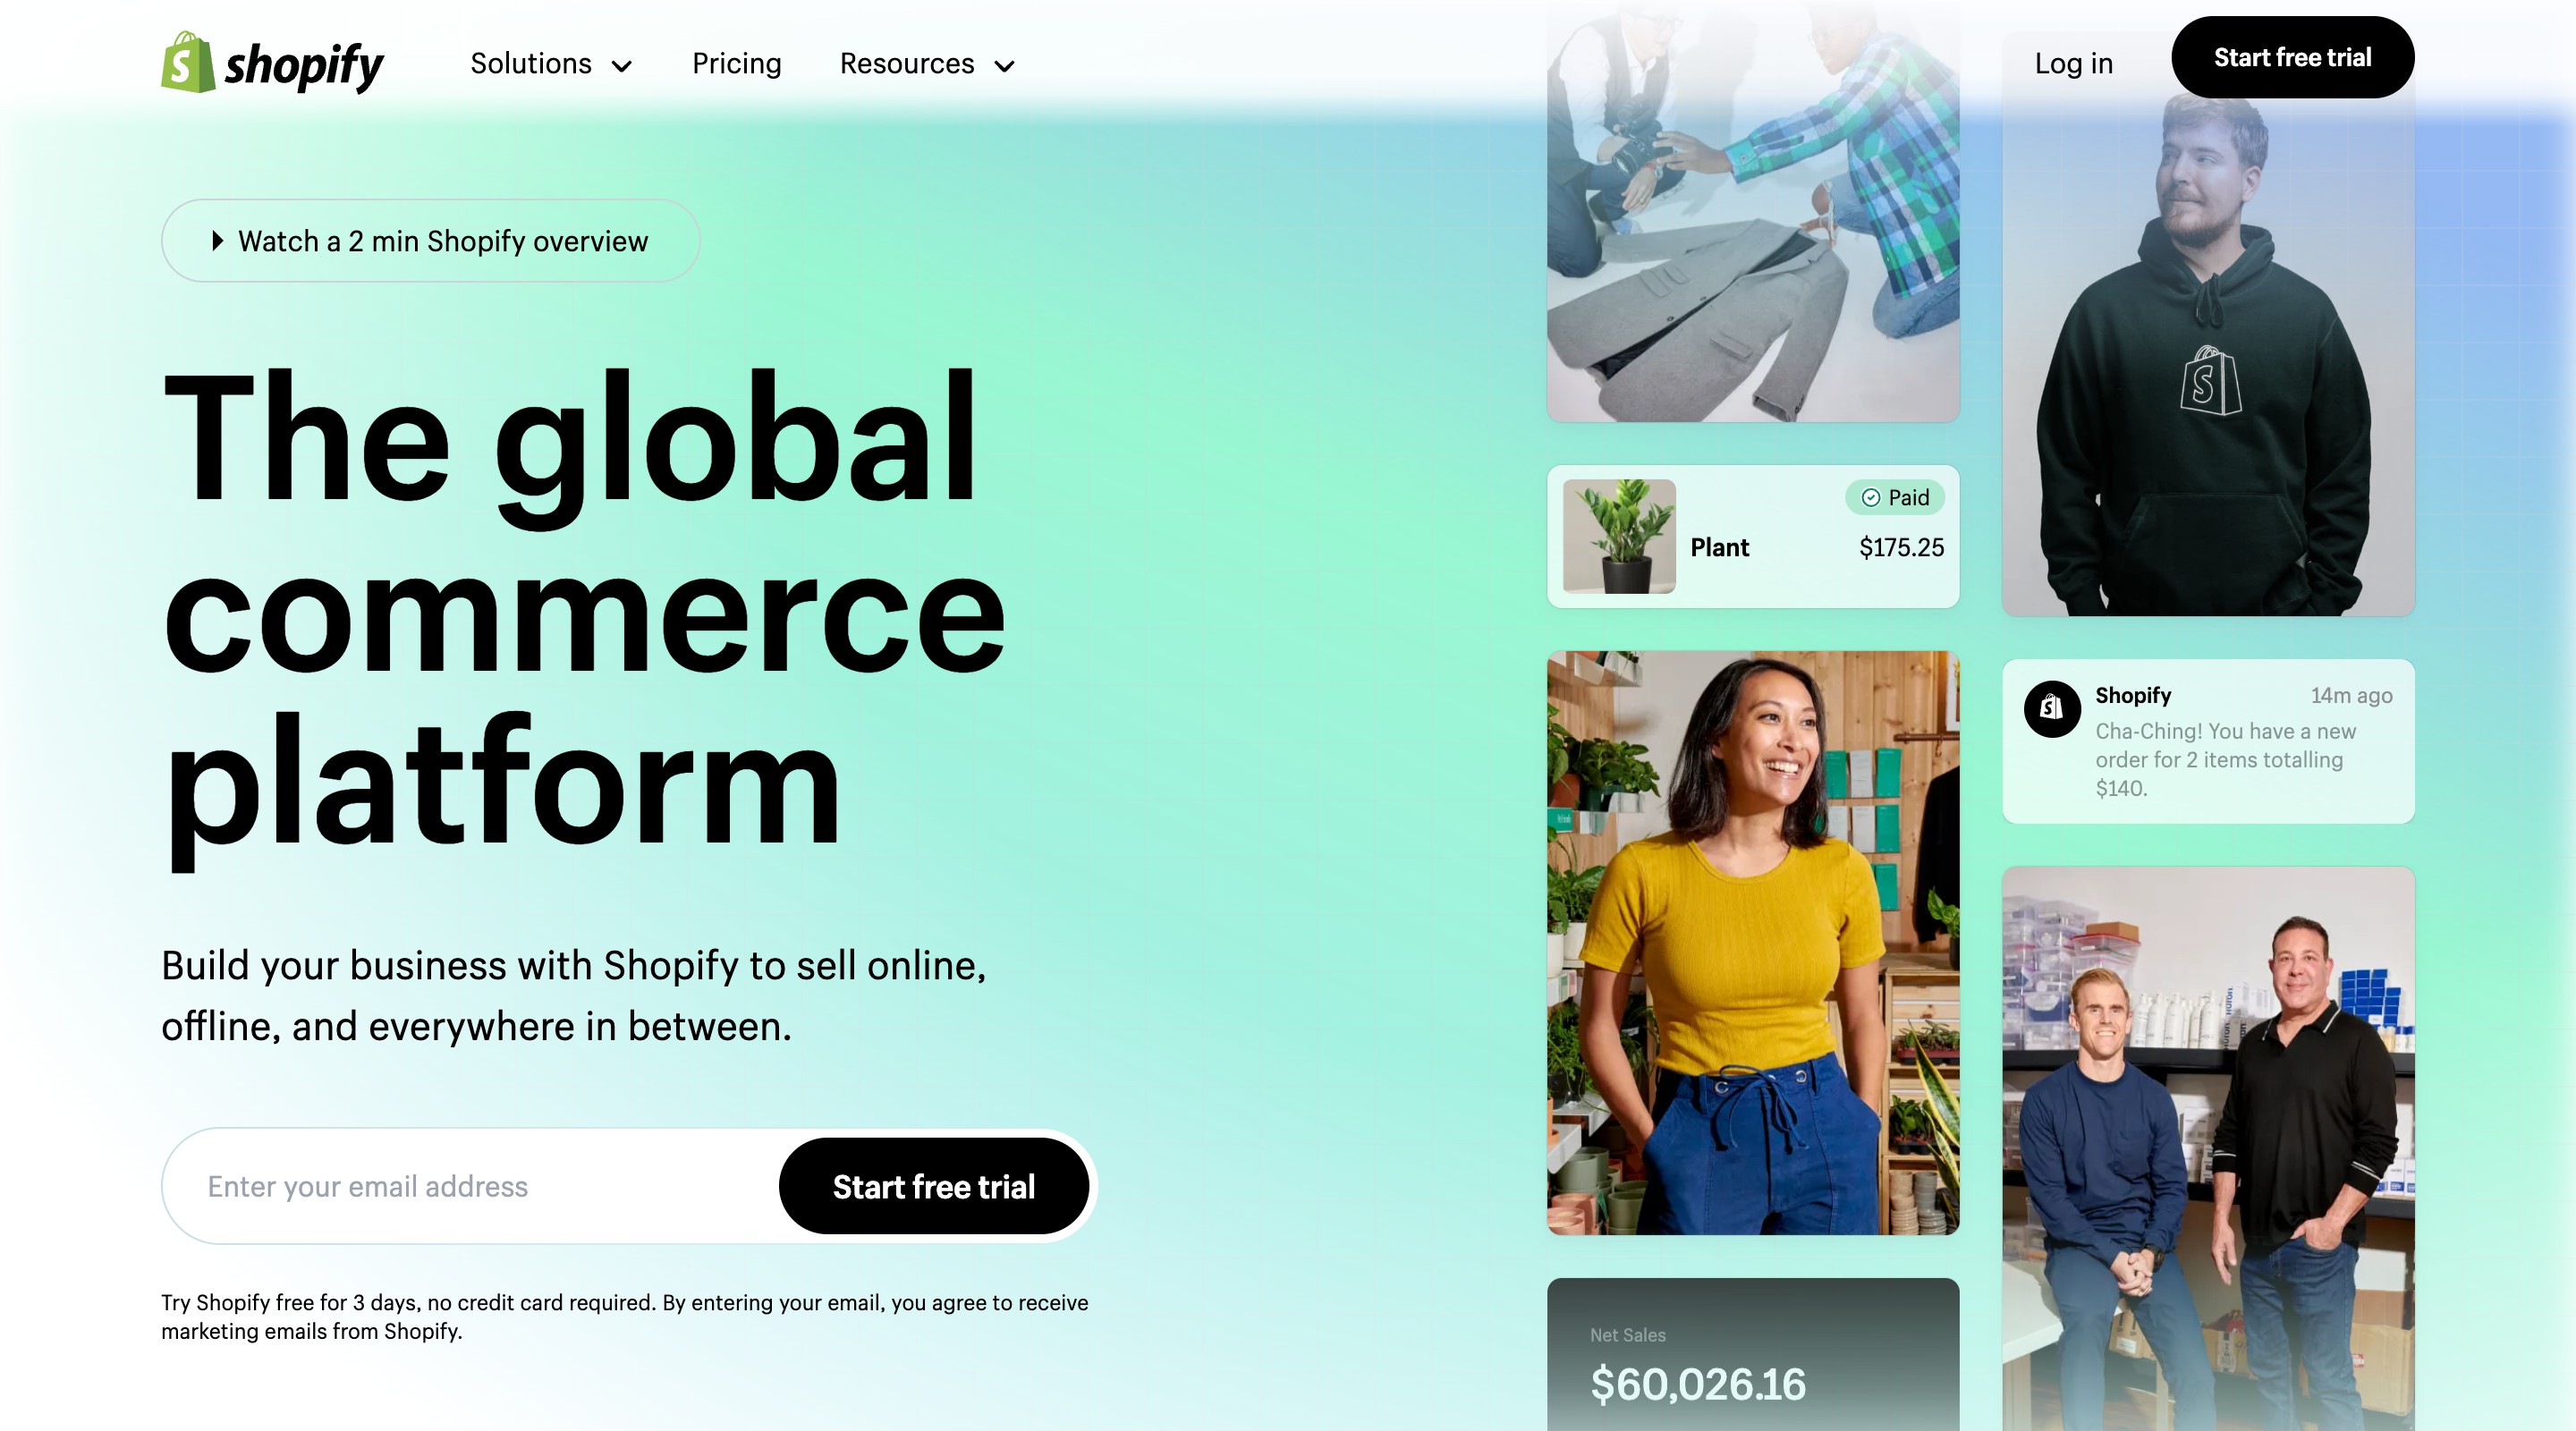 Screenshot of the Shopify website hero. It contains a navbar with the Shopify logo, some menu items, and buttons to log in or start a free trial. The hero is split in two columns. To the right is a photo collage of people in different types of stores and screenshots of various parts of the Shopify product. To the left is a main headline. Above it is a button to watch a video about Shopify. Below is a subheadline and email form to start a free trial.